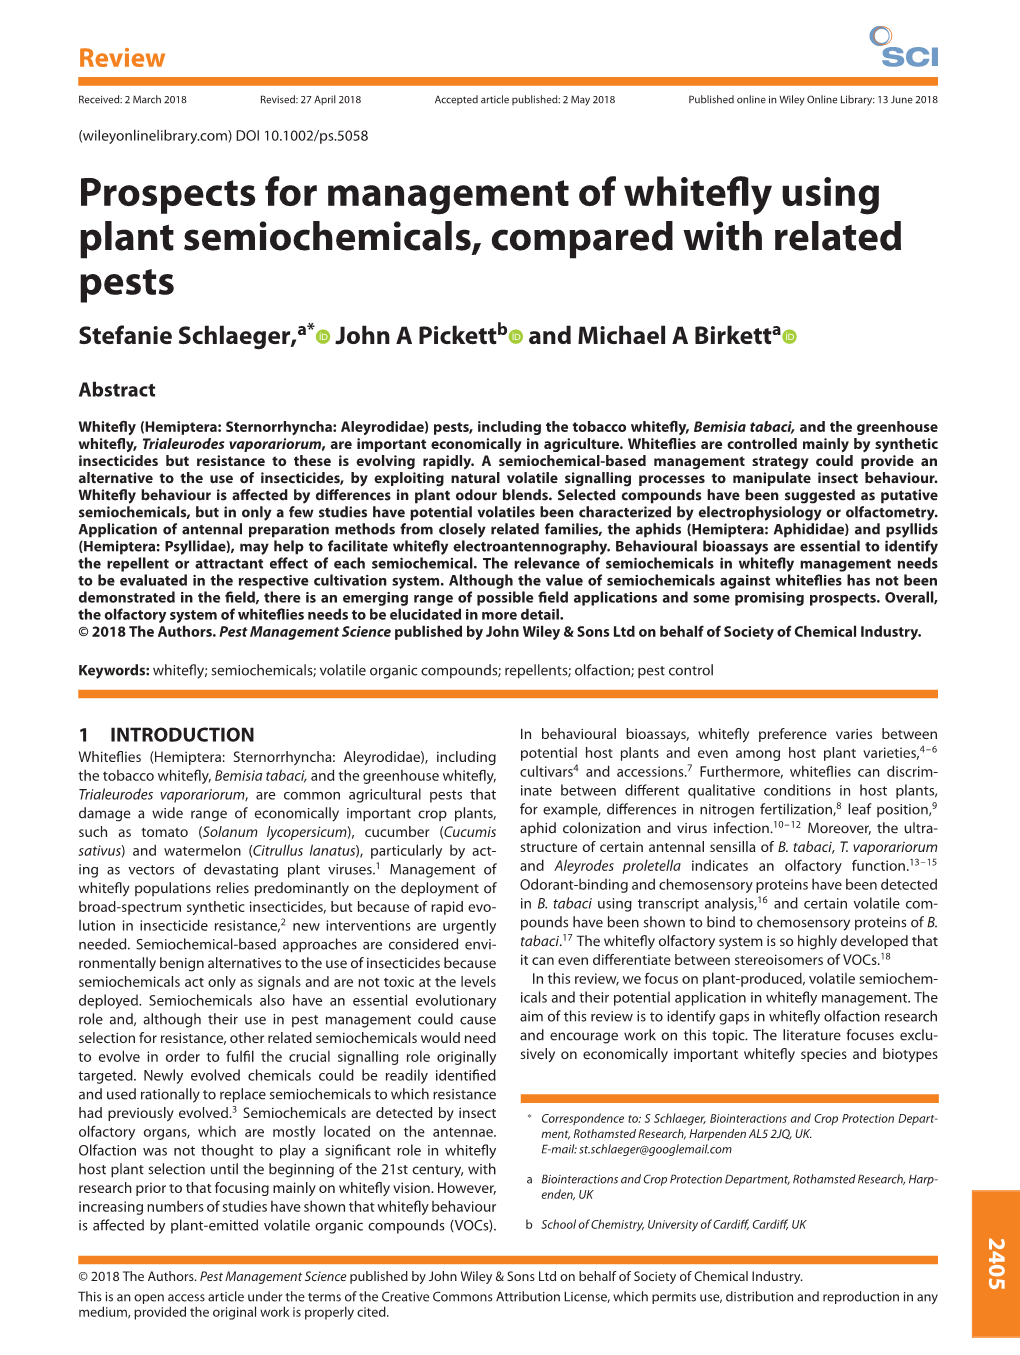 Prospects for Management of Whitefly Using Plant